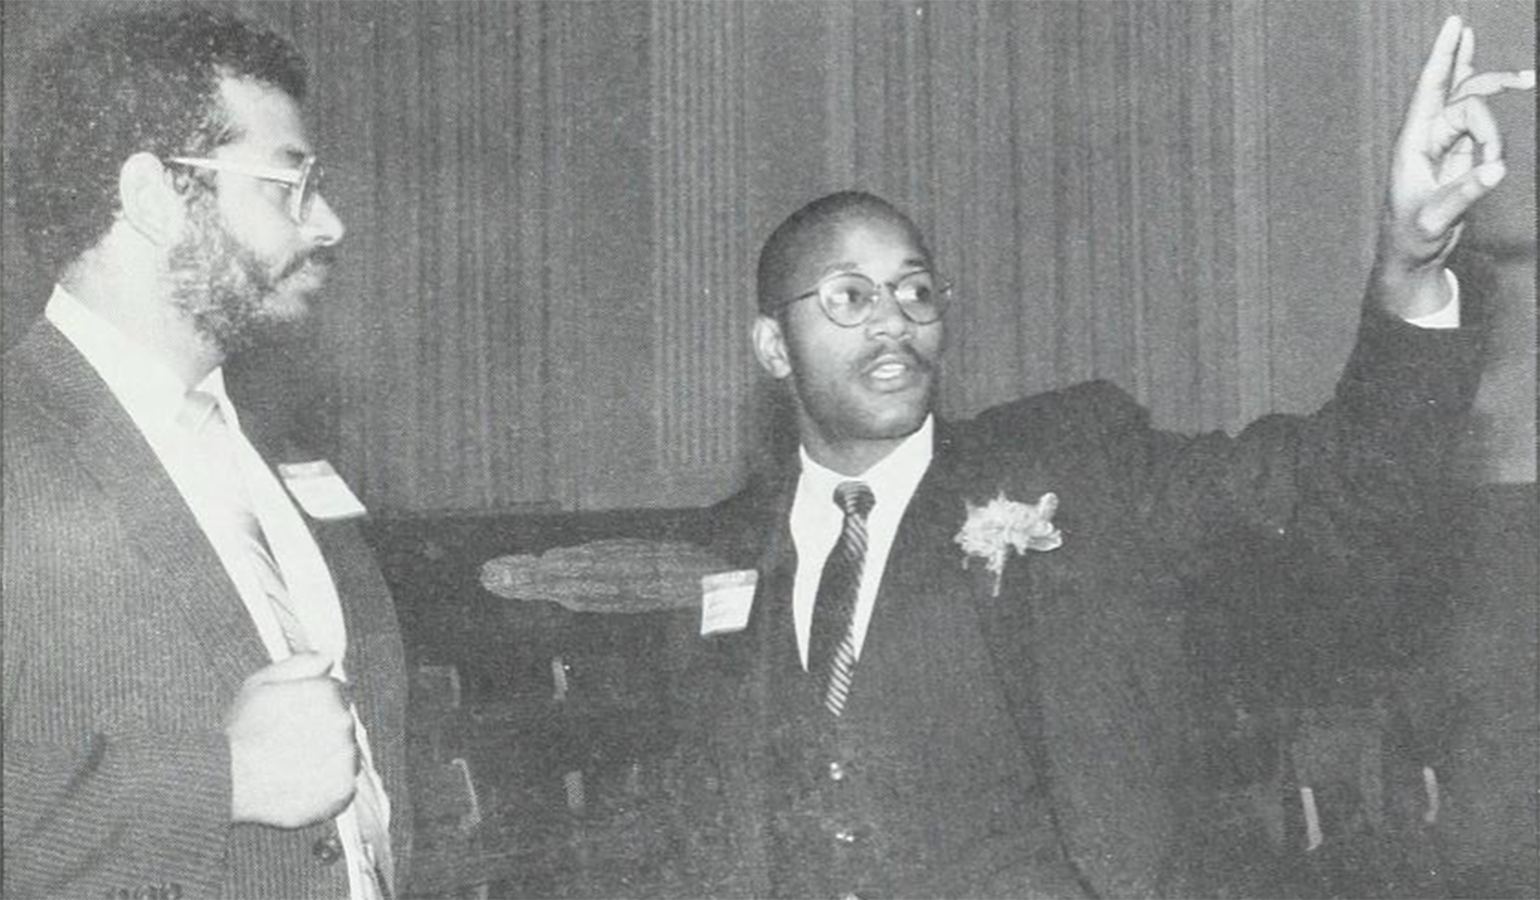 Brian Washington (JD ’85) discusses legal study at Wake Forest with a visitor during Minority Recruitment Day in 1983.